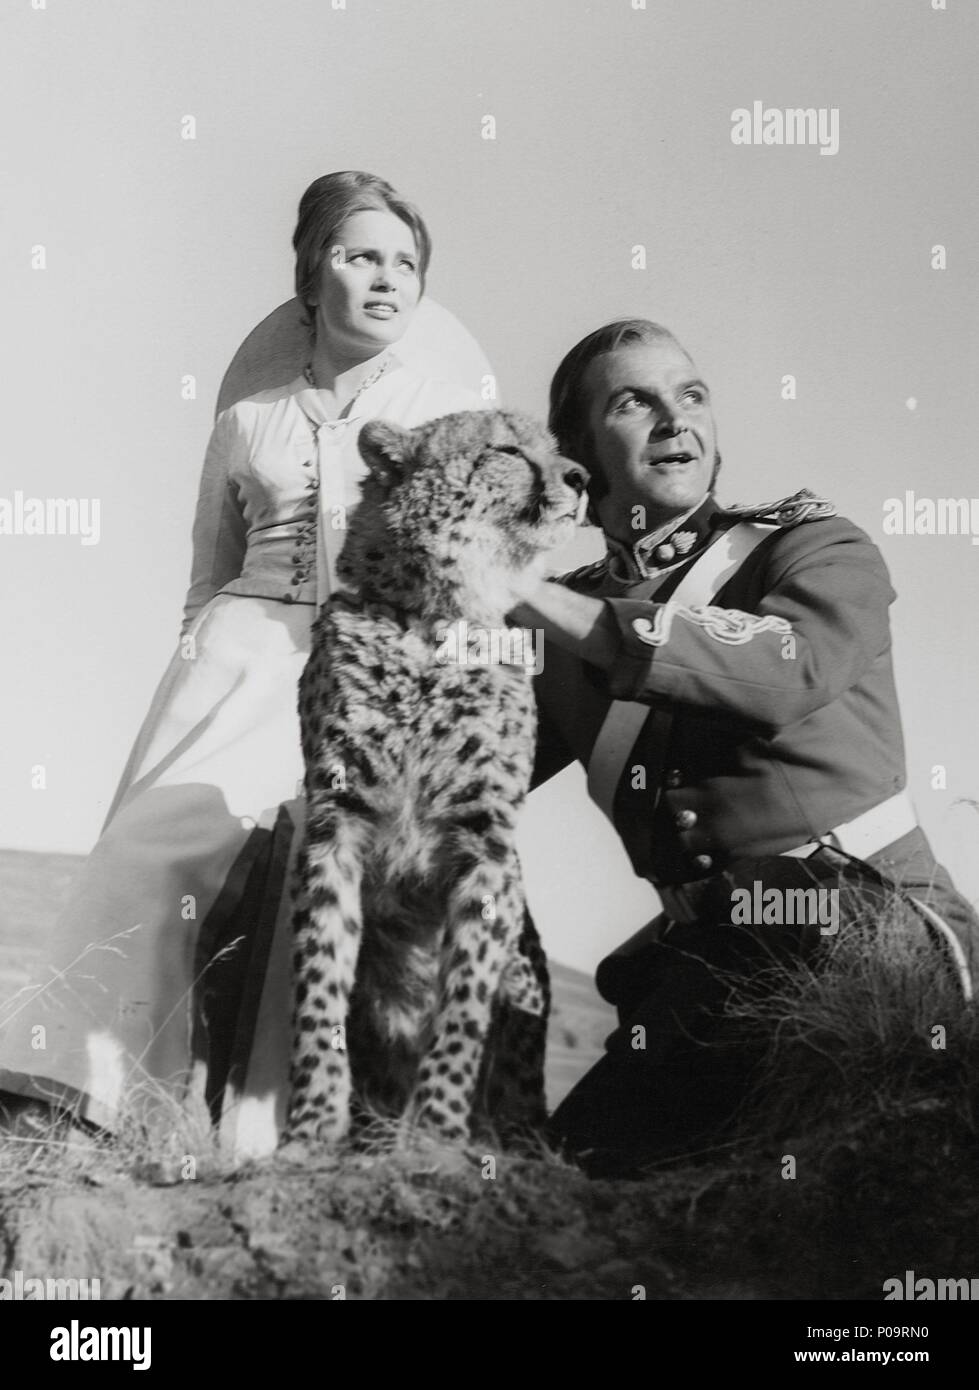 Original Film Title: ANN.  English Title: ANN.  Film Director: CY ENDFIELD.  Year: 1964.  Stars: STANLEY BAKER; ULLA JACOBSSON. Credit: PARAMOUNT PICTURES / Album Stock Photo